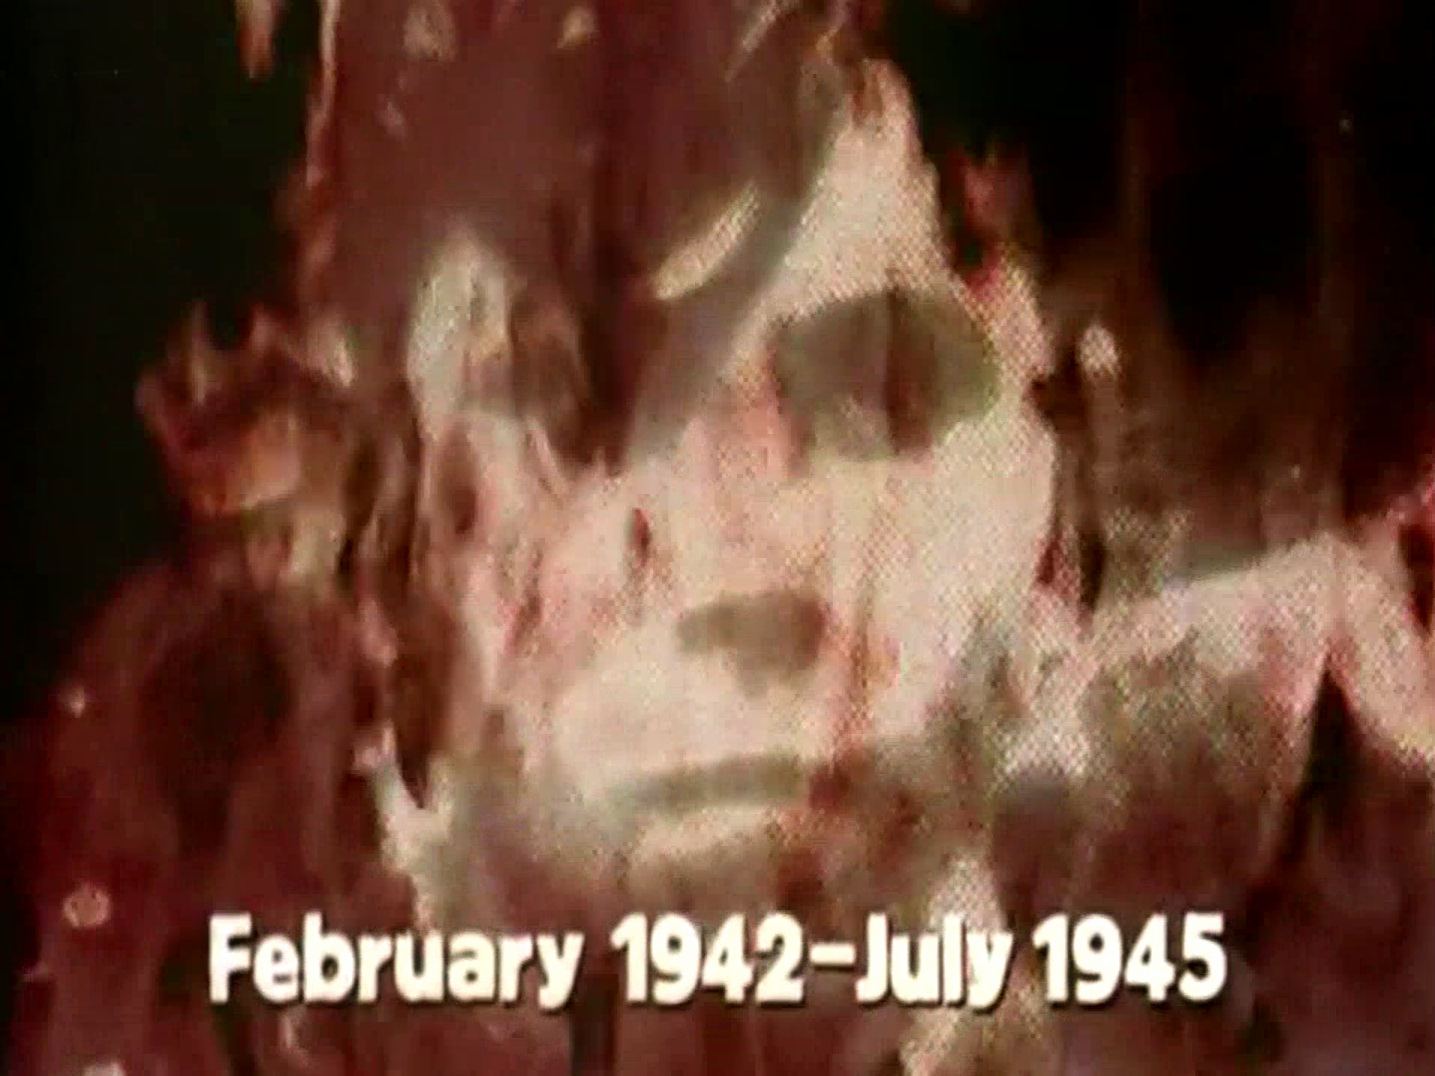 Main title from the 1974 ‘Pacific’ episode of The World at War (1973-1974) (2). February 1942 – July 1945